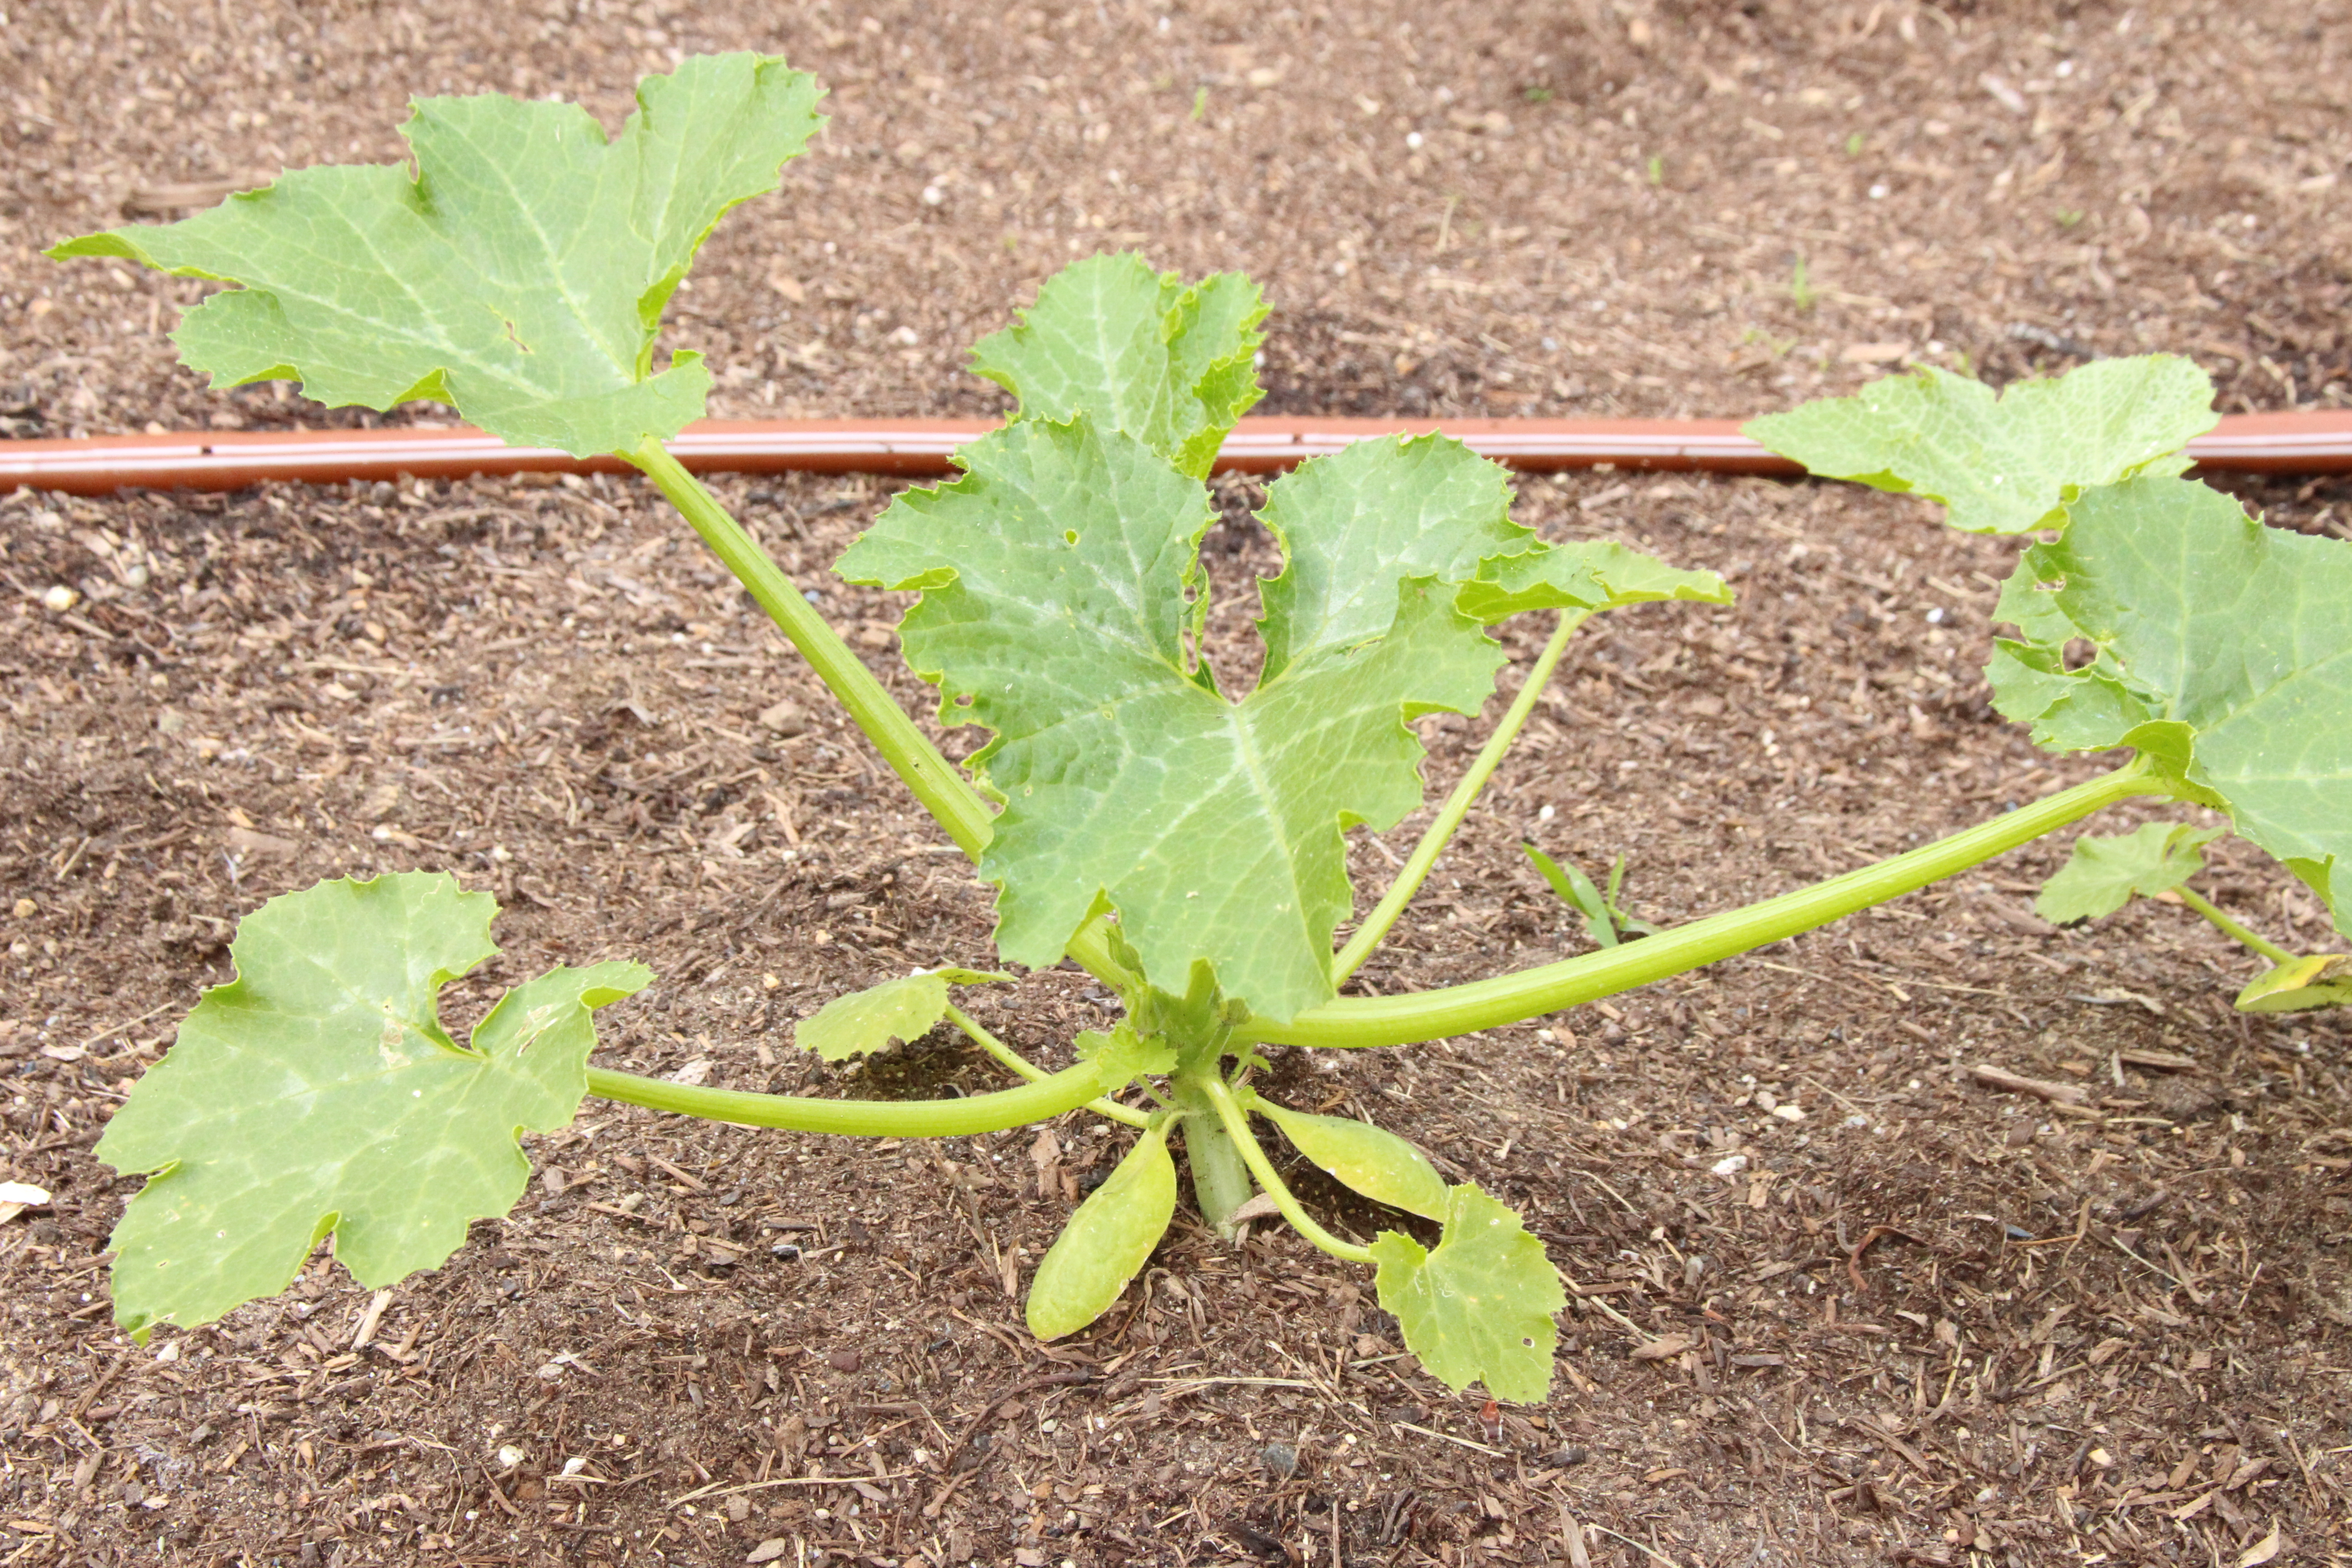 The GardenZeus Guide to Watering Cucumbers, Melons, and Squash (Cucurbits)